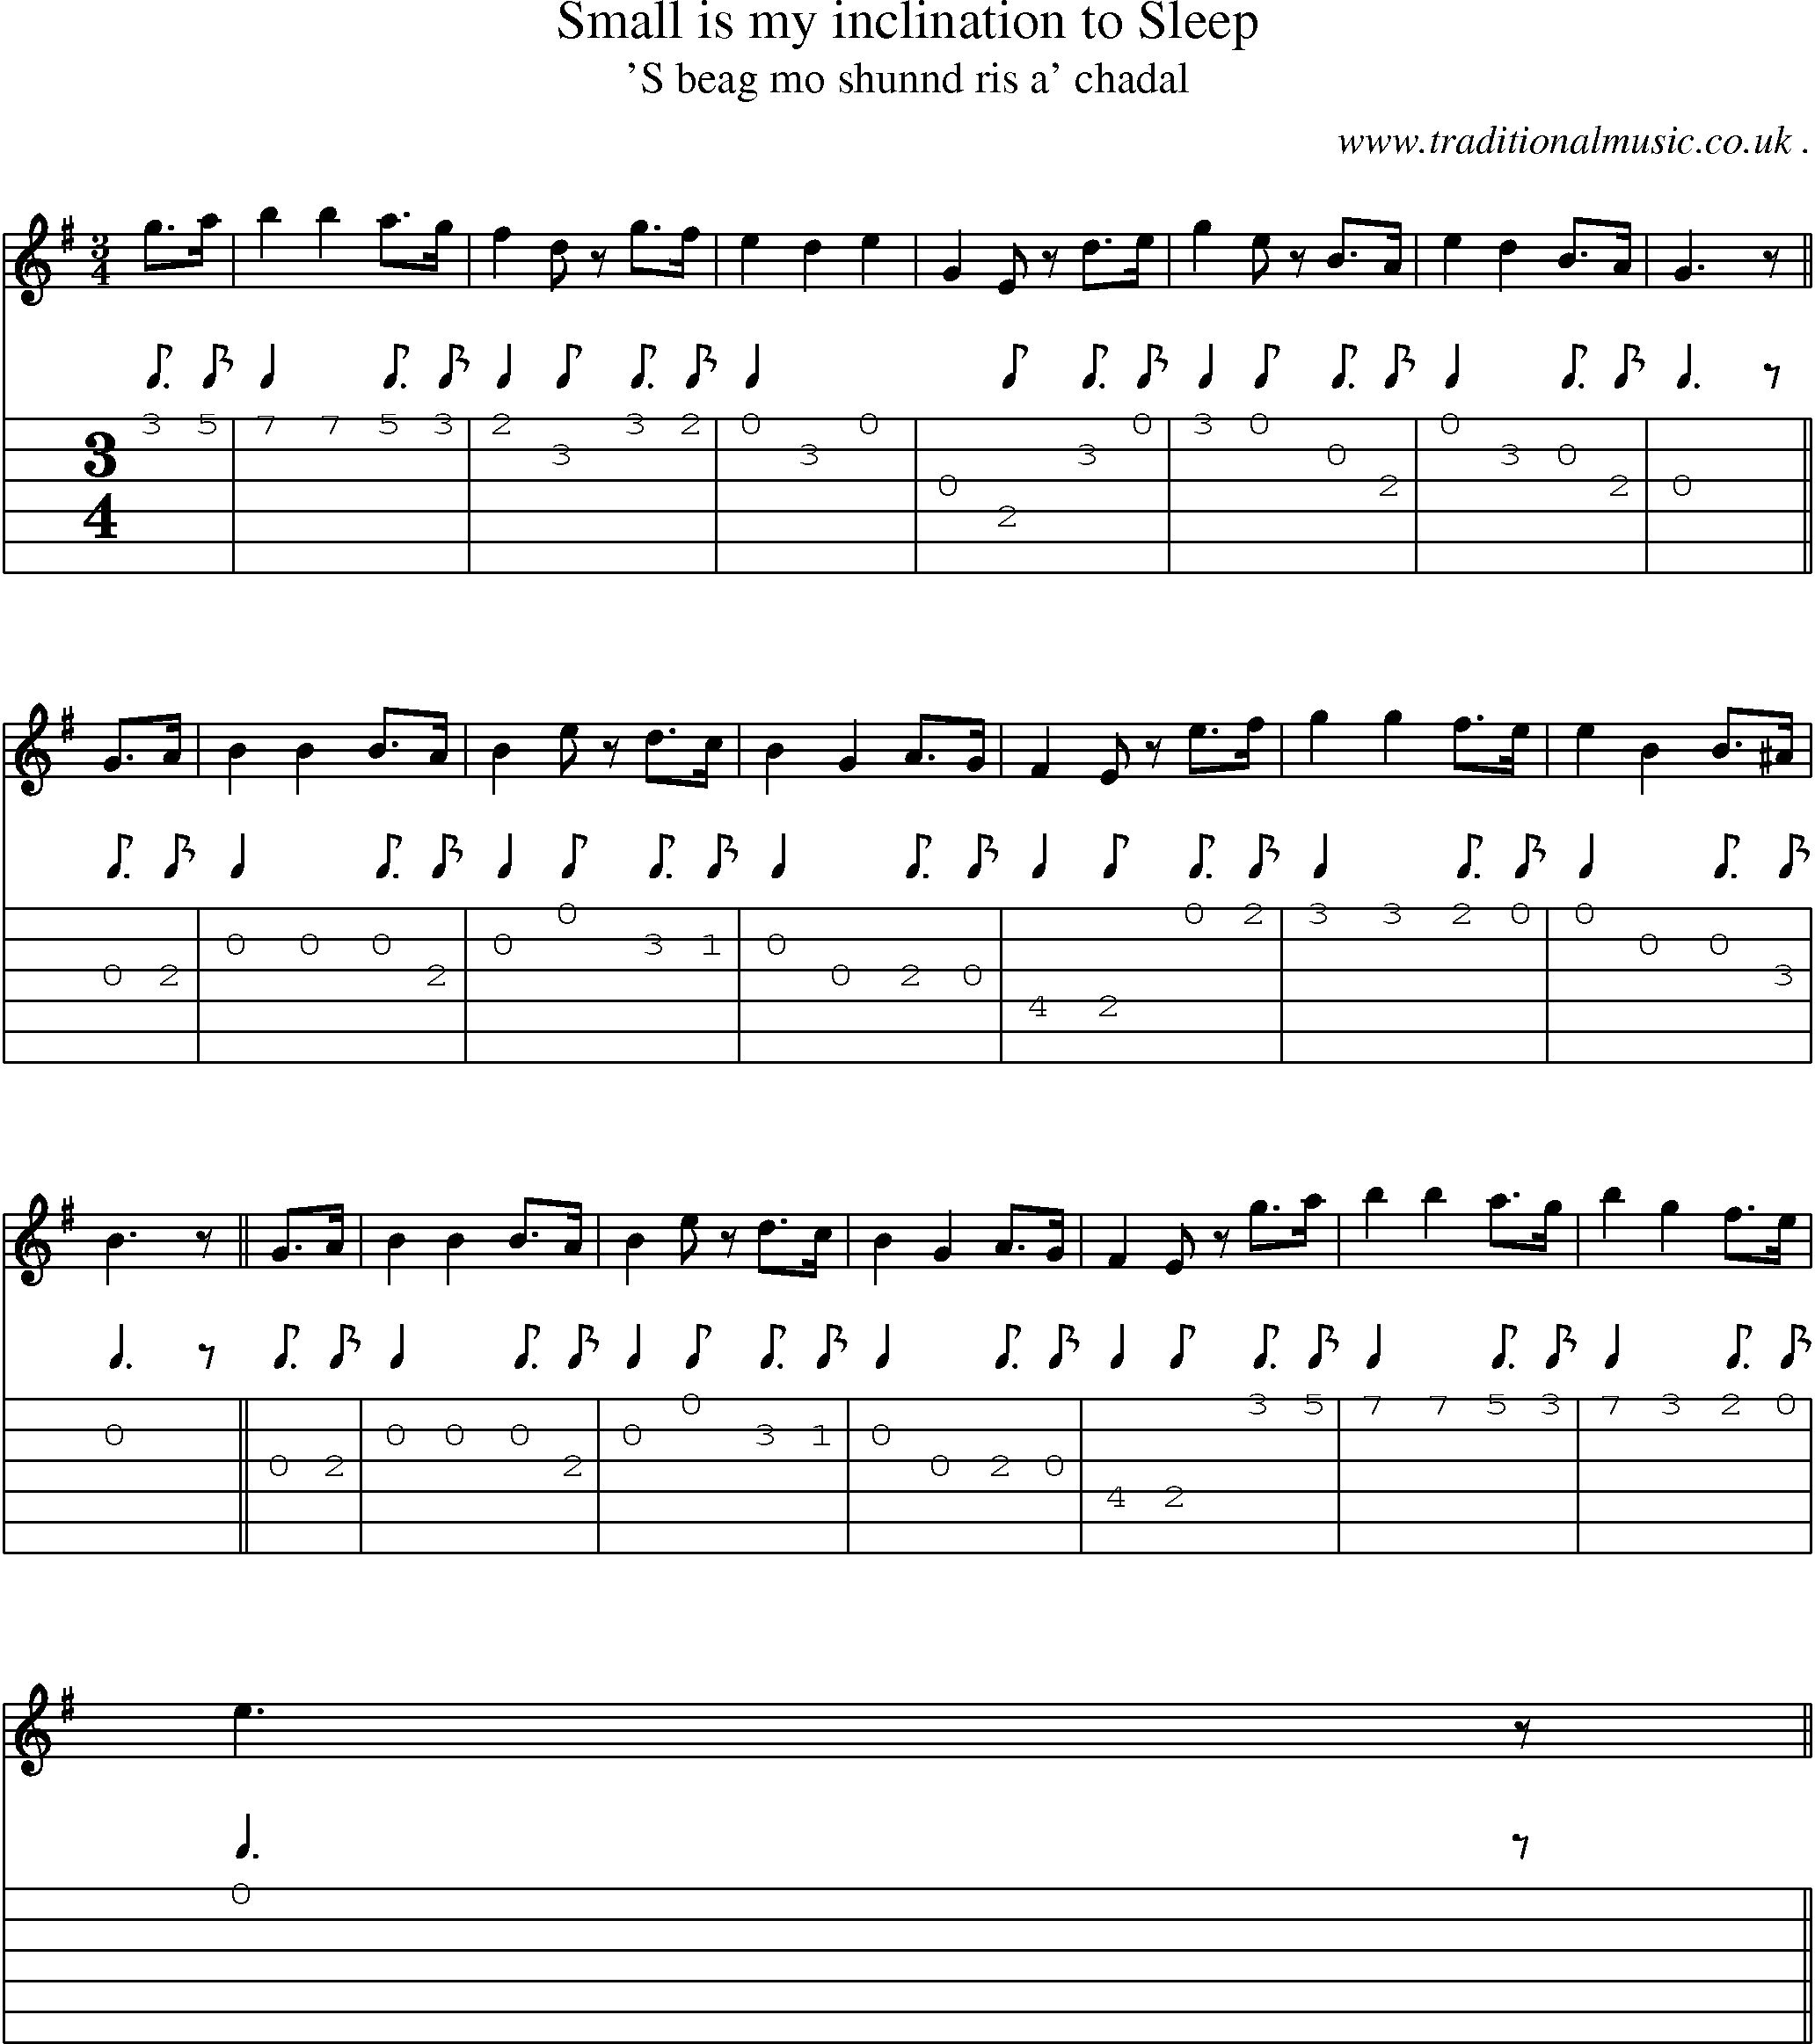 Sheet-music  score, Chords and Guitar Tabs for Small Is My Inclination To Sleep